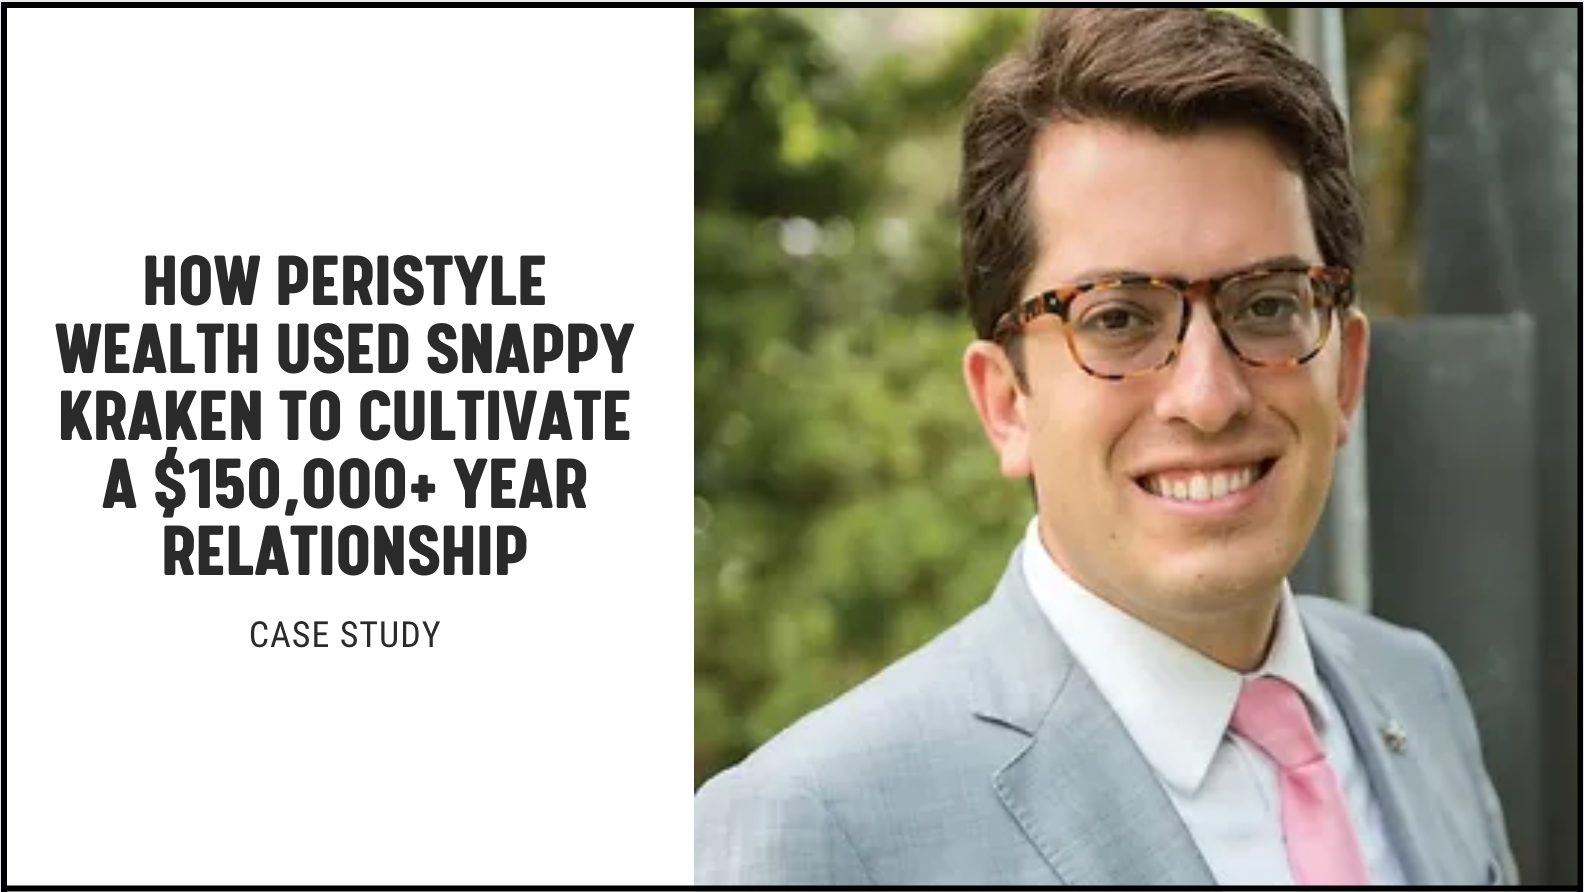 Case Study: How Peristyle Wealth Used Snappy Kraken To Cultivate a $150,000+ Year Relationship